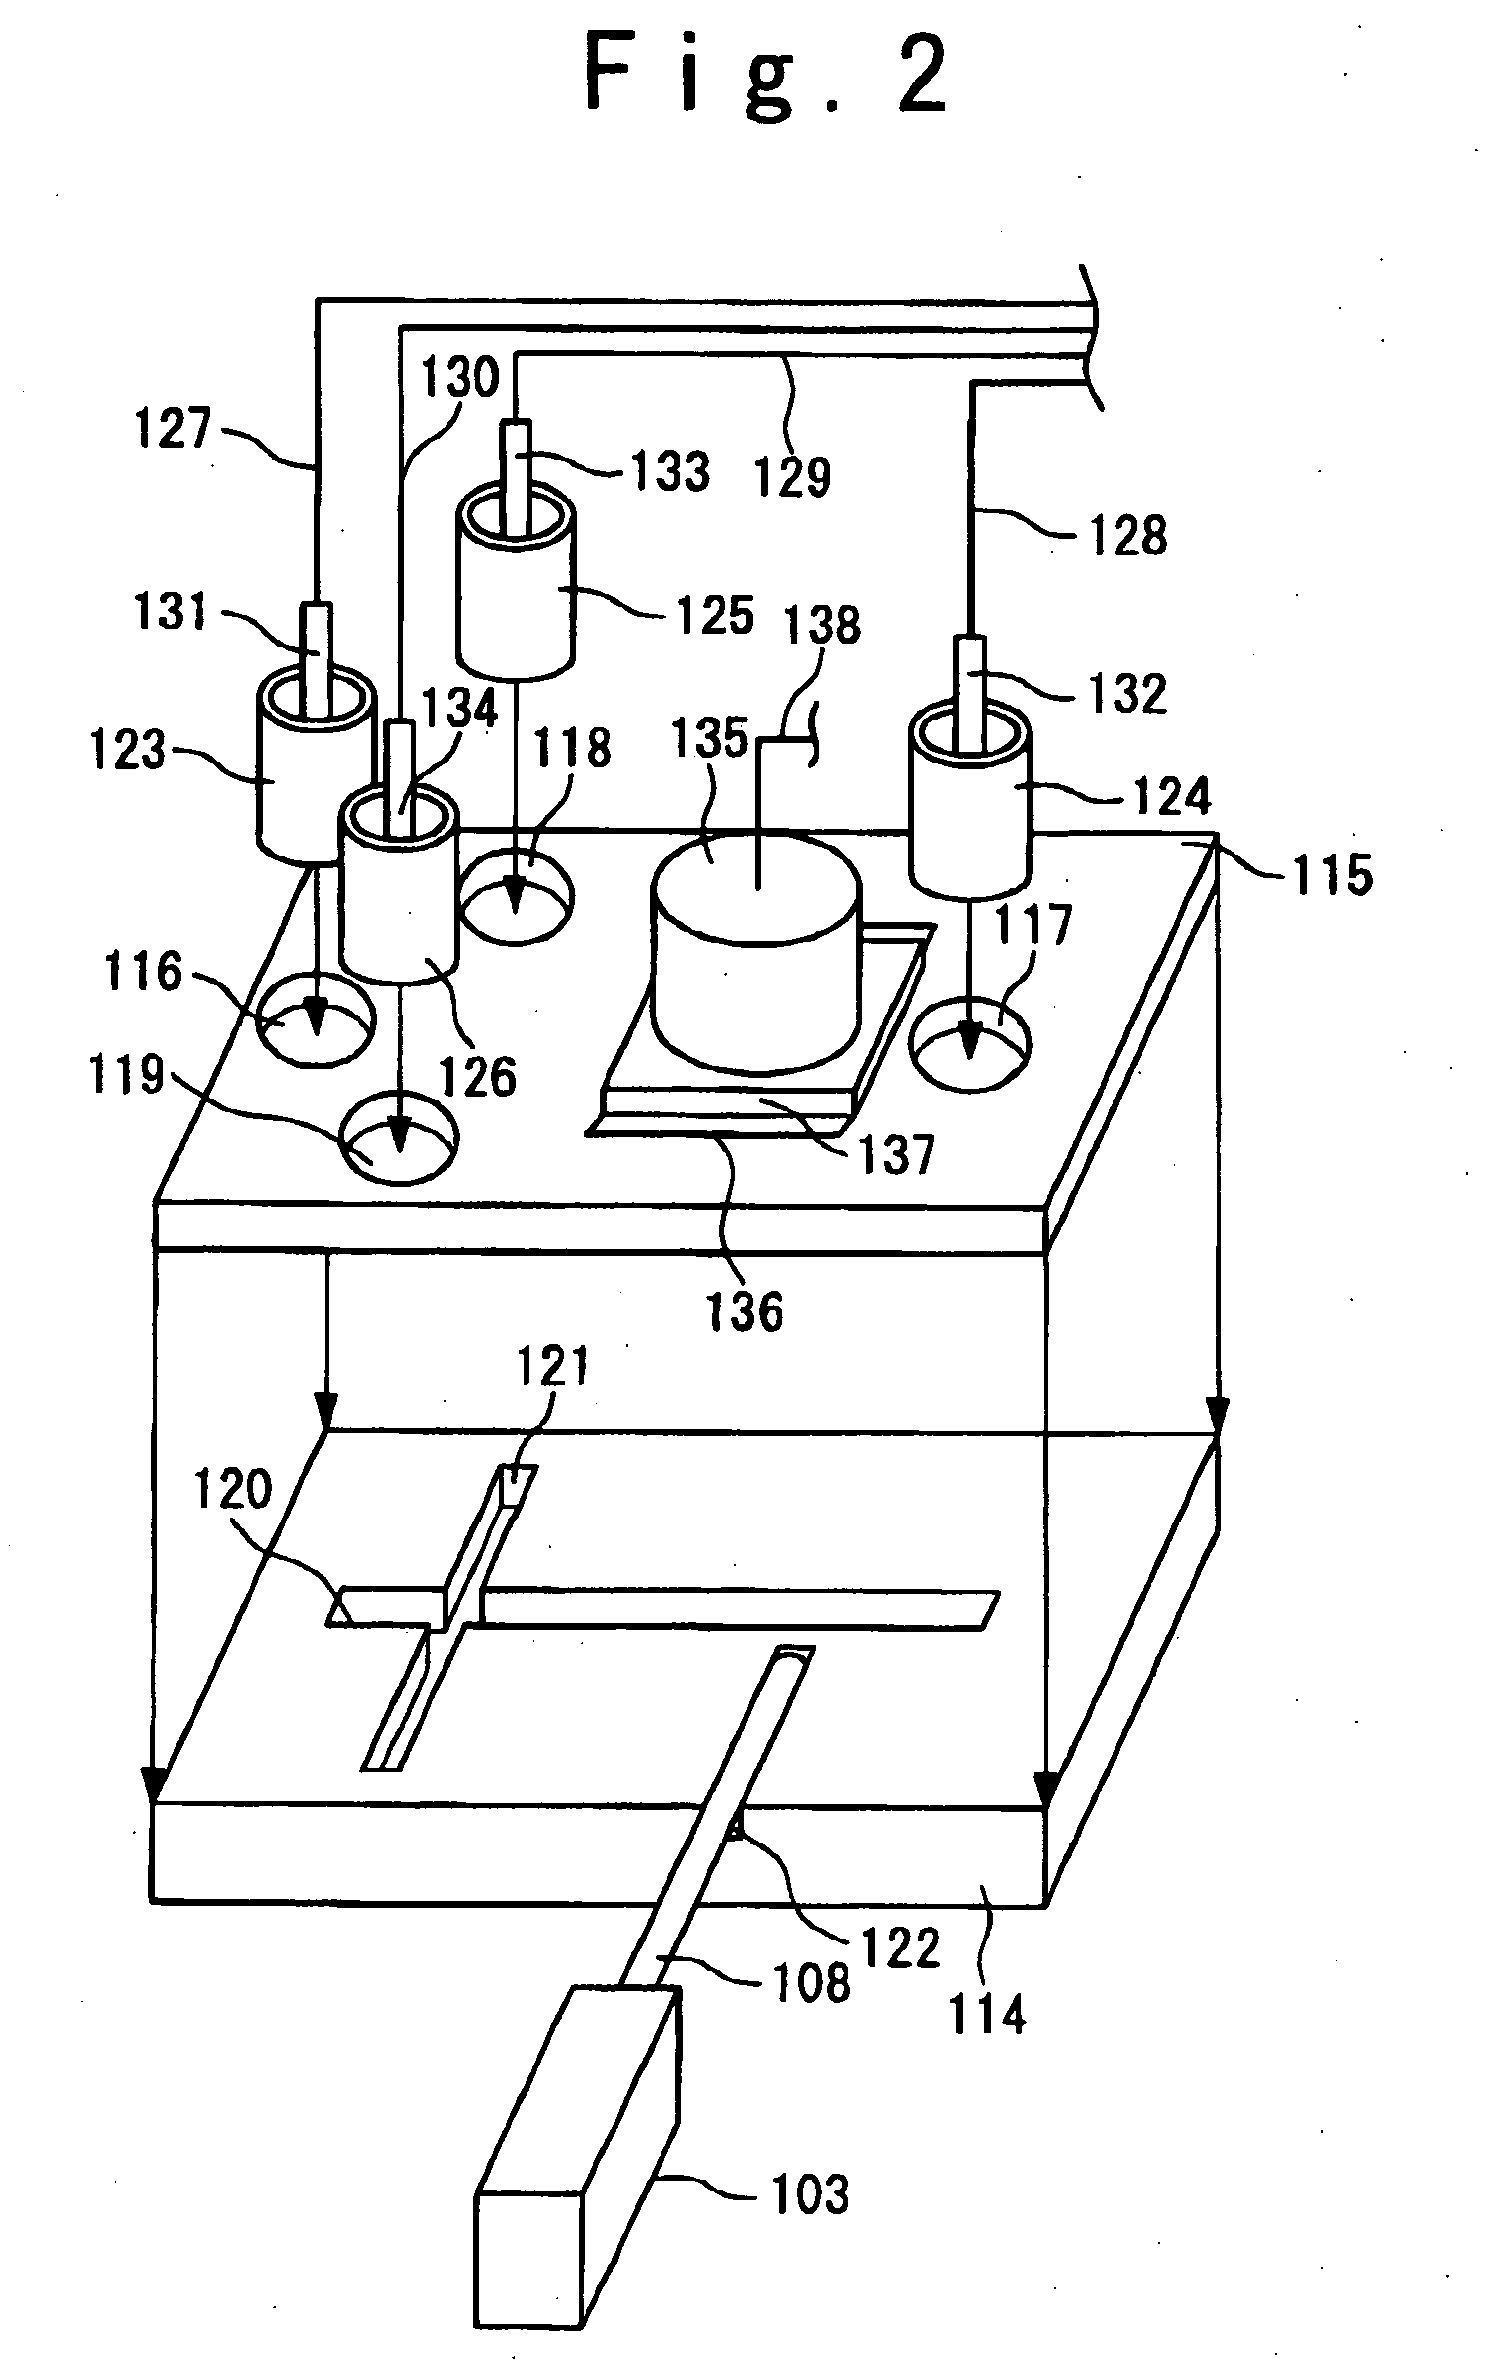 Microchip, method of manufacturing microchip, and method of detecting compositions